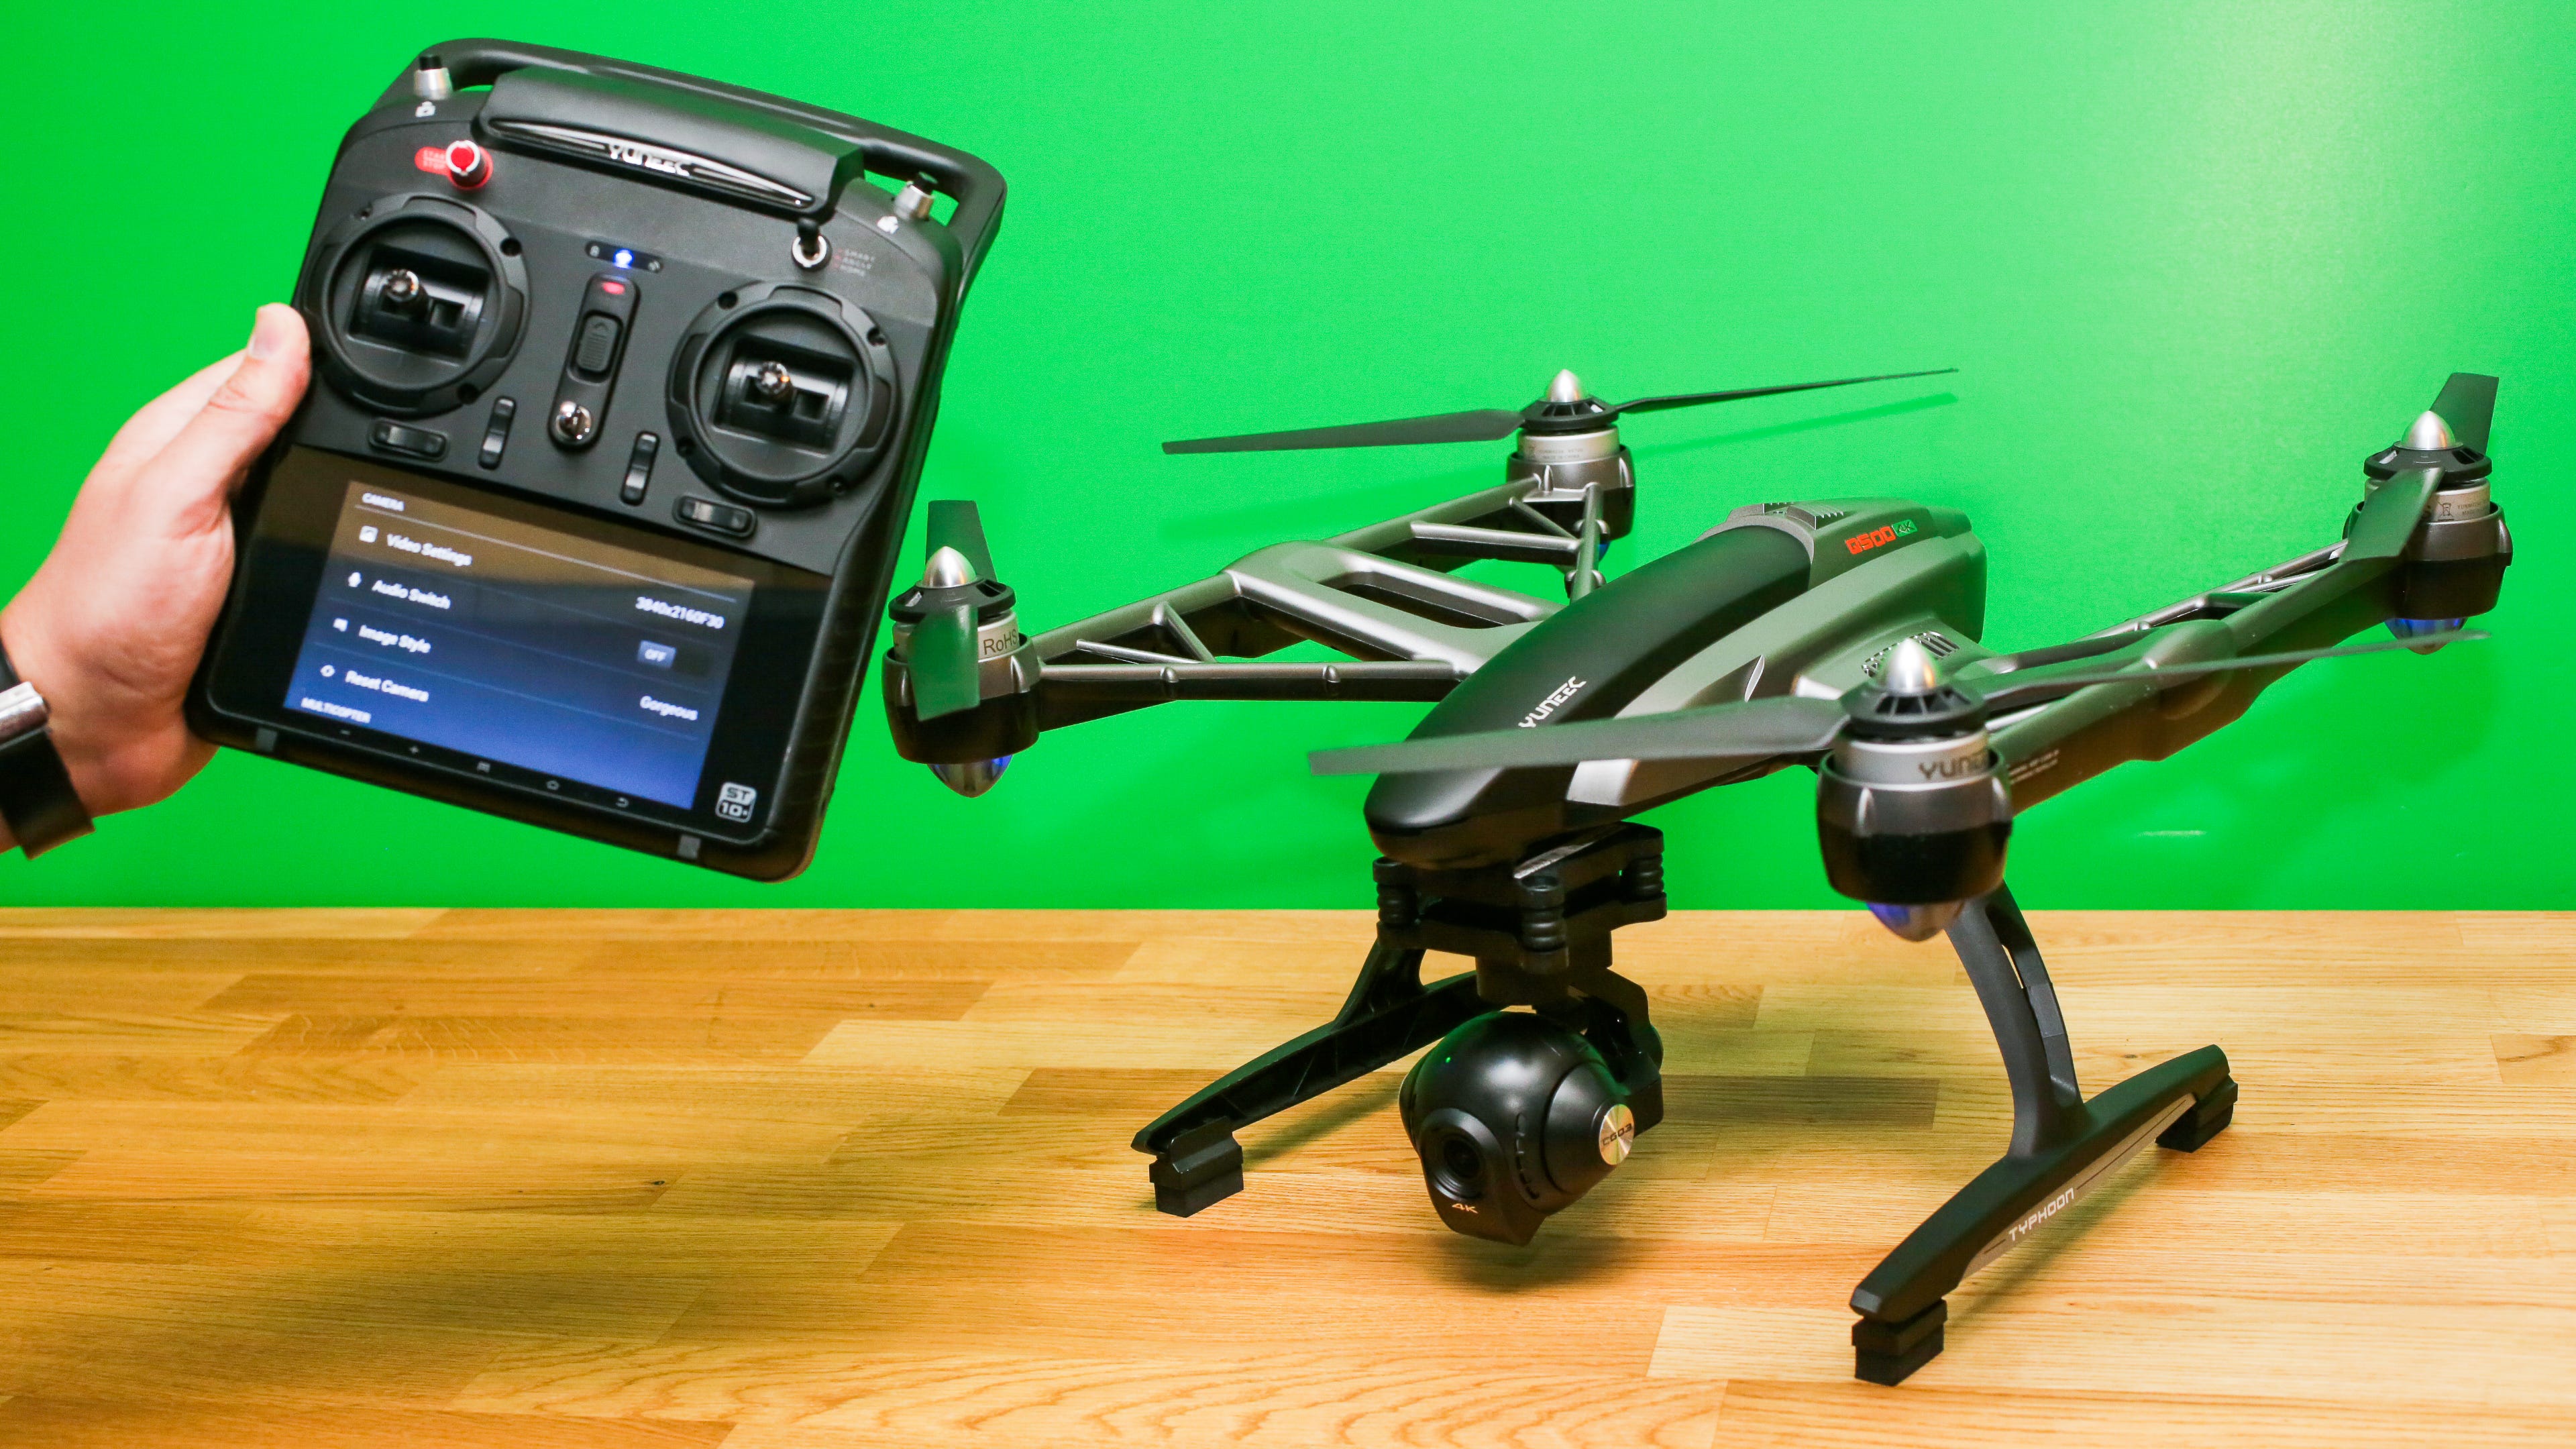 The Yuneec Q500 drone plummets to $350 - CNET